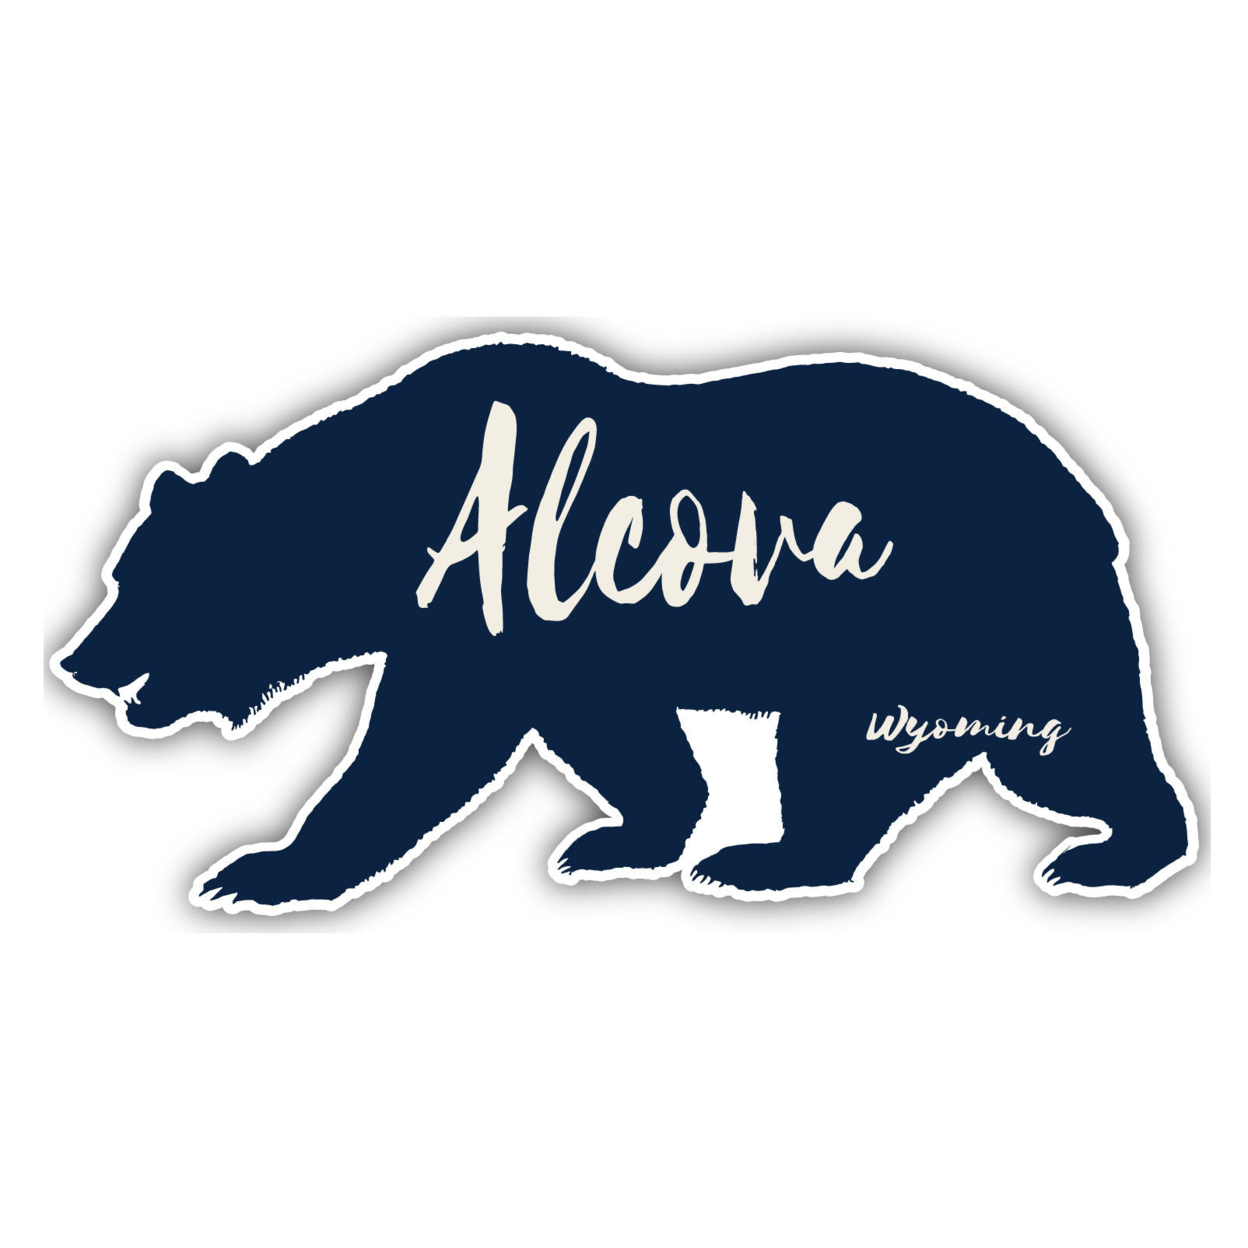 Alcova Wyoming Souvenir Decorative Stickers (Choose Theme And Size) - 4-Pack, 10-Inch, Bear